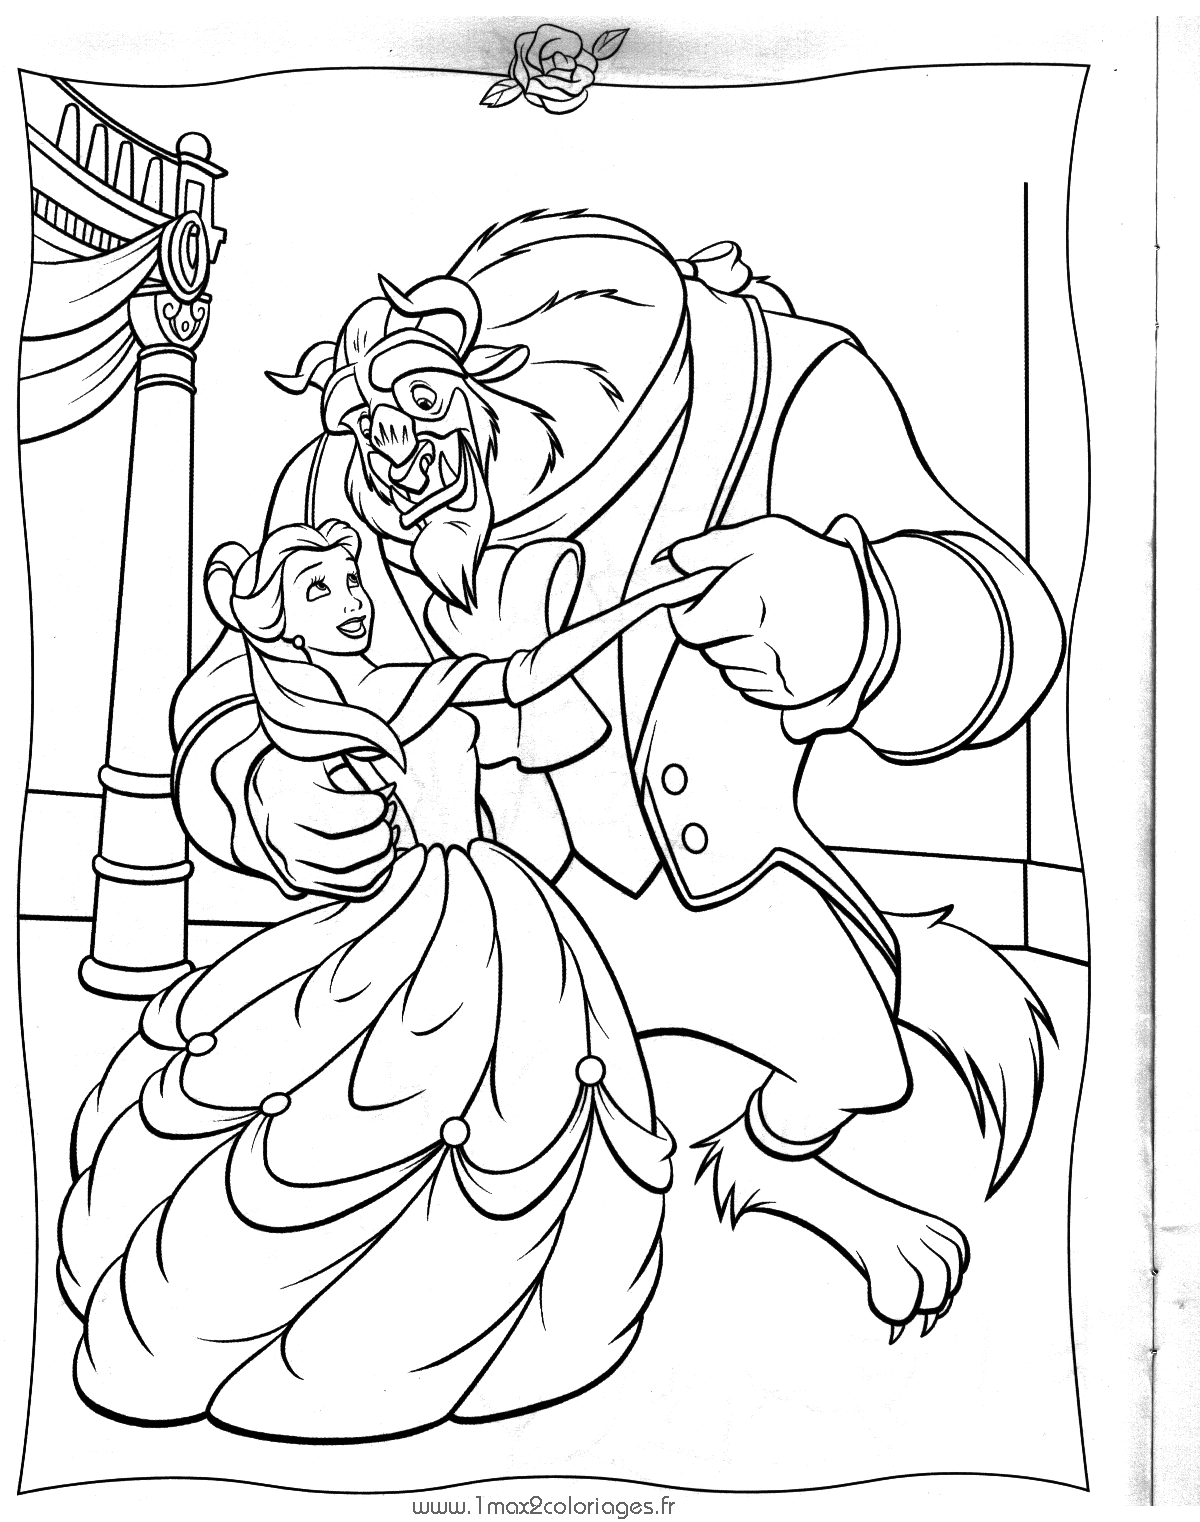 Coloring page: The Beauty and the Beast (Animation Movies) #131026 - Free Printable Coloring Pages